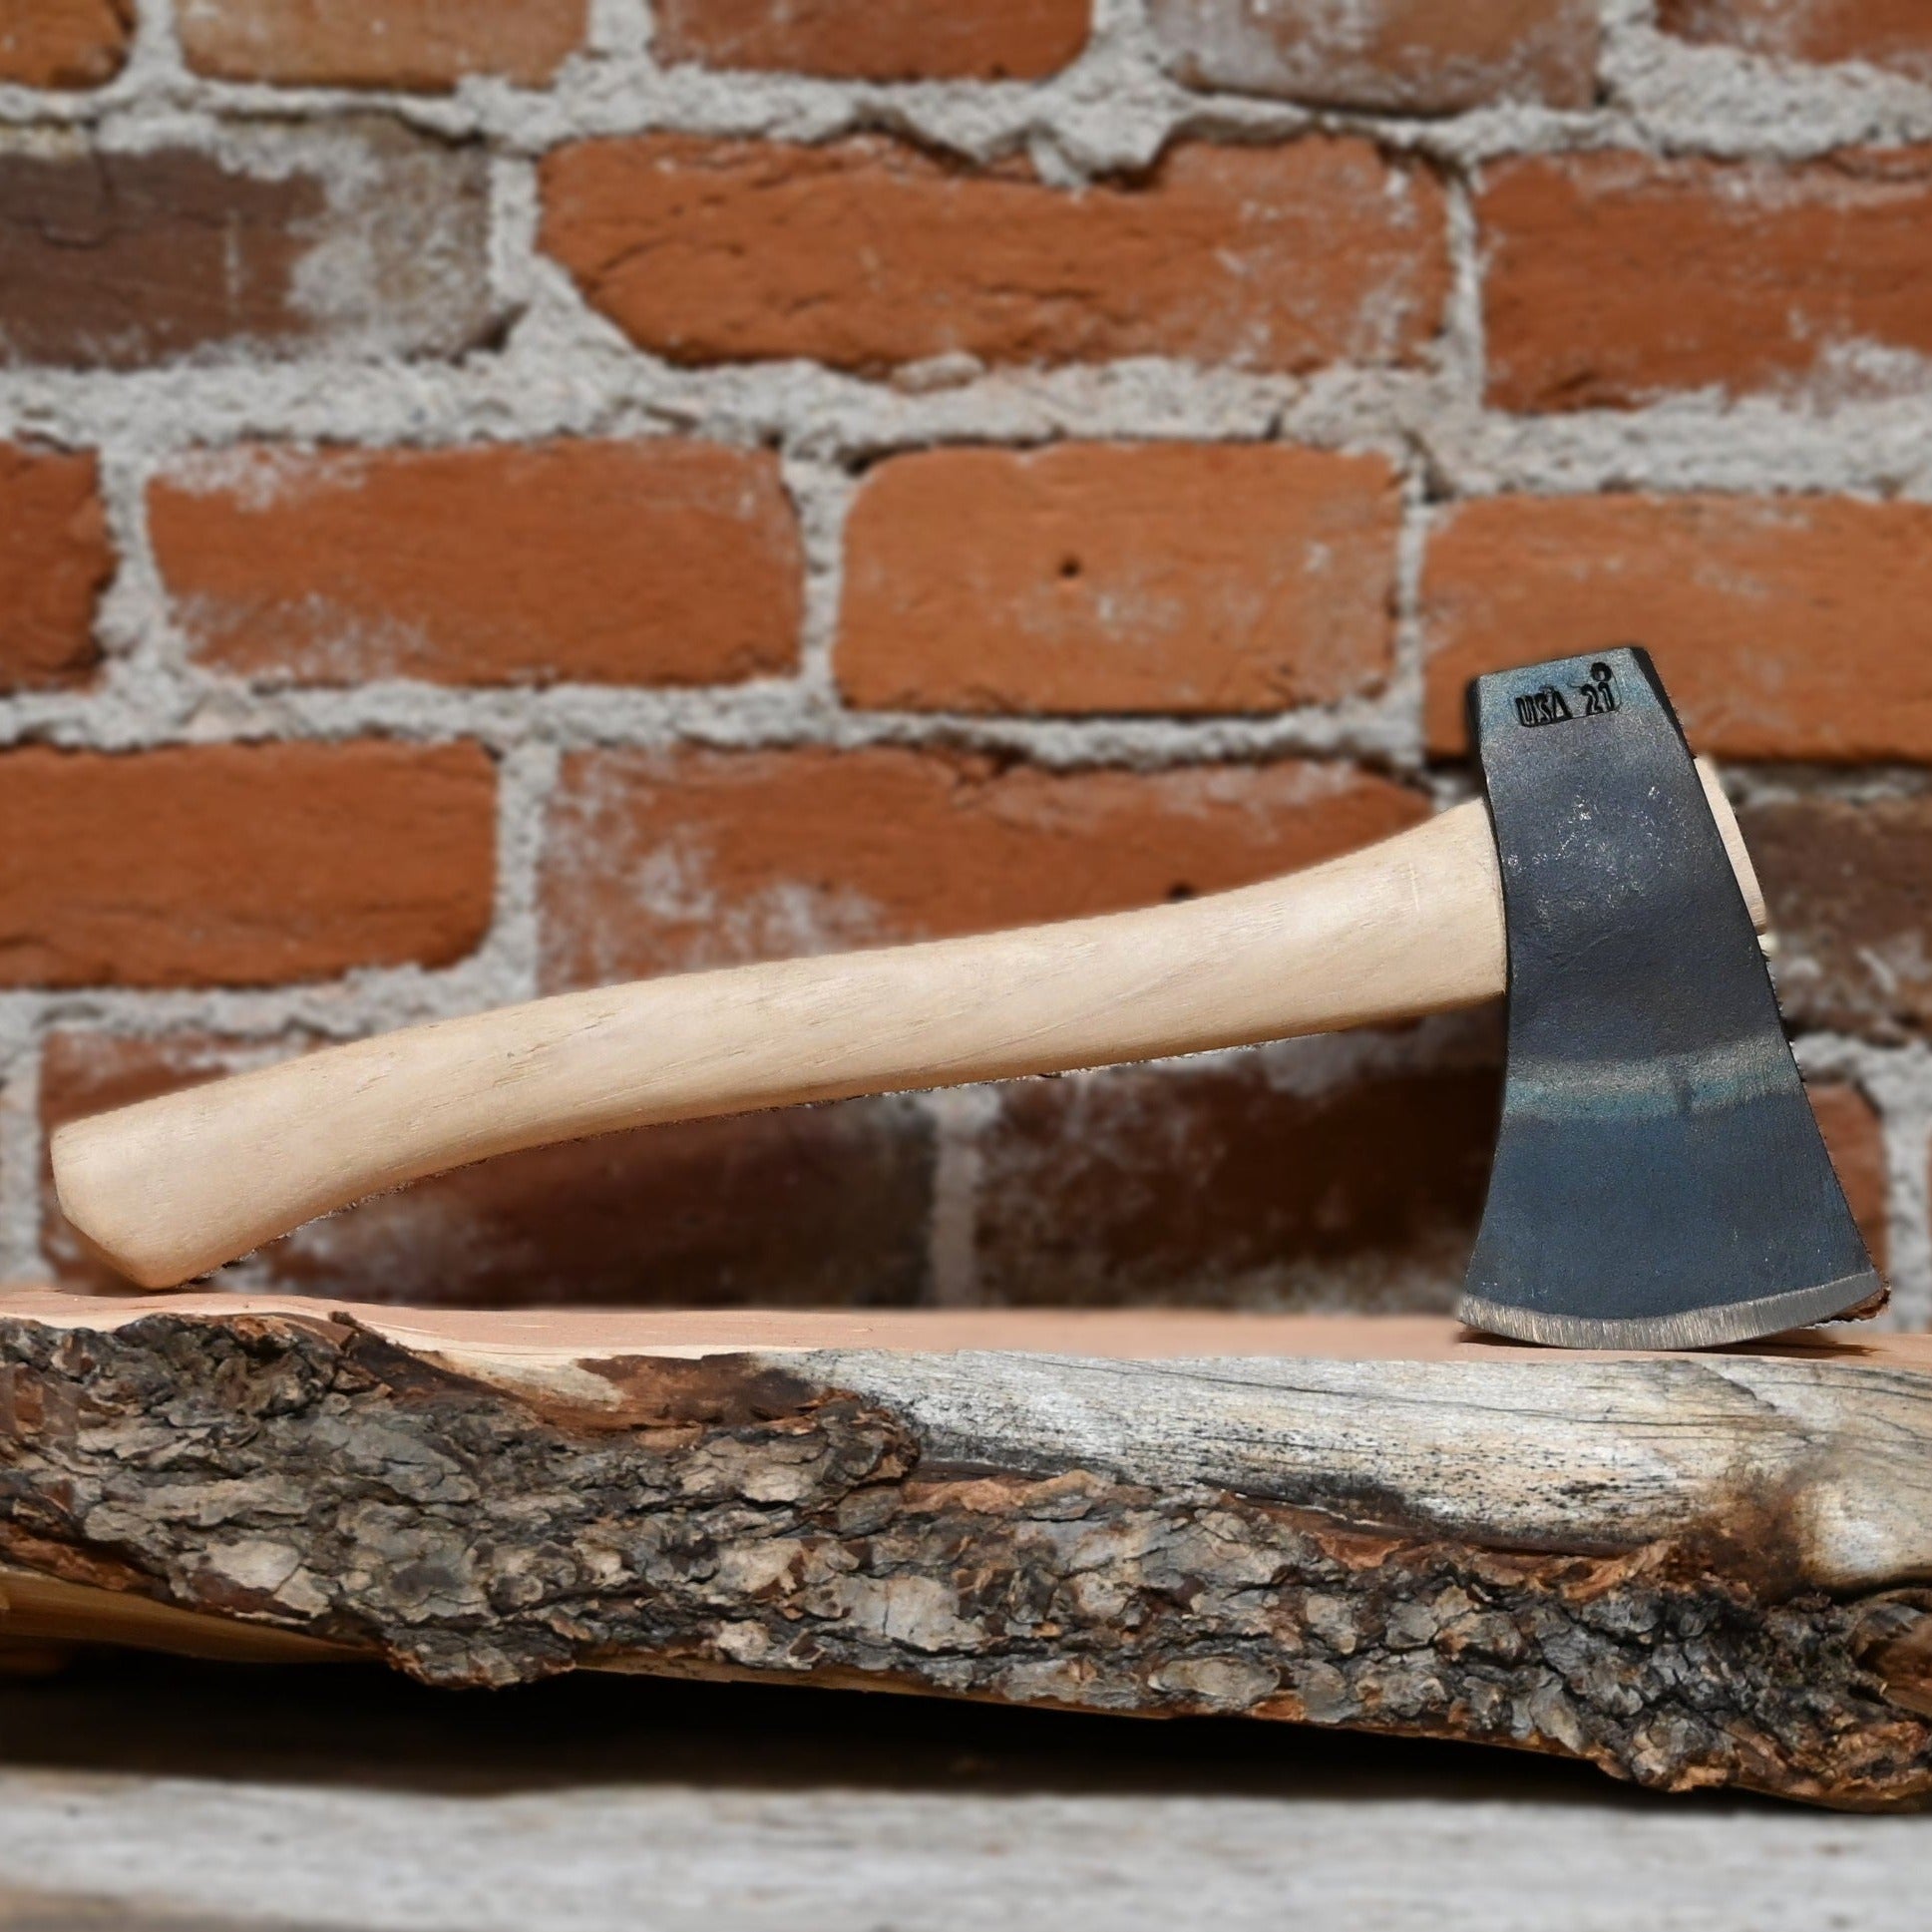 Flying Fox Woodsman Hatchet by Council Tools view of axe